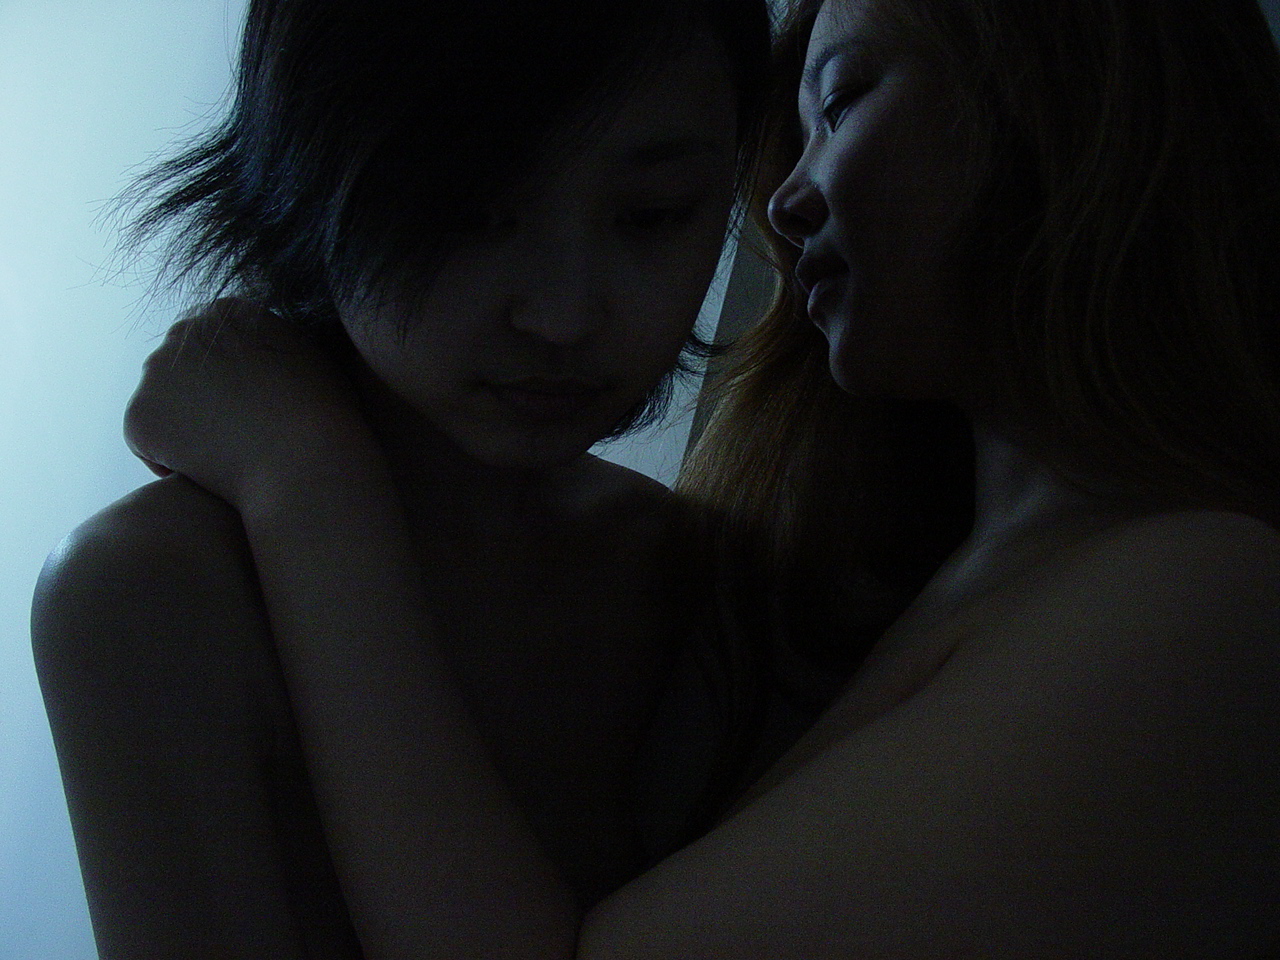 Still from sisters. A close up, showing two people in shadow, embracing.